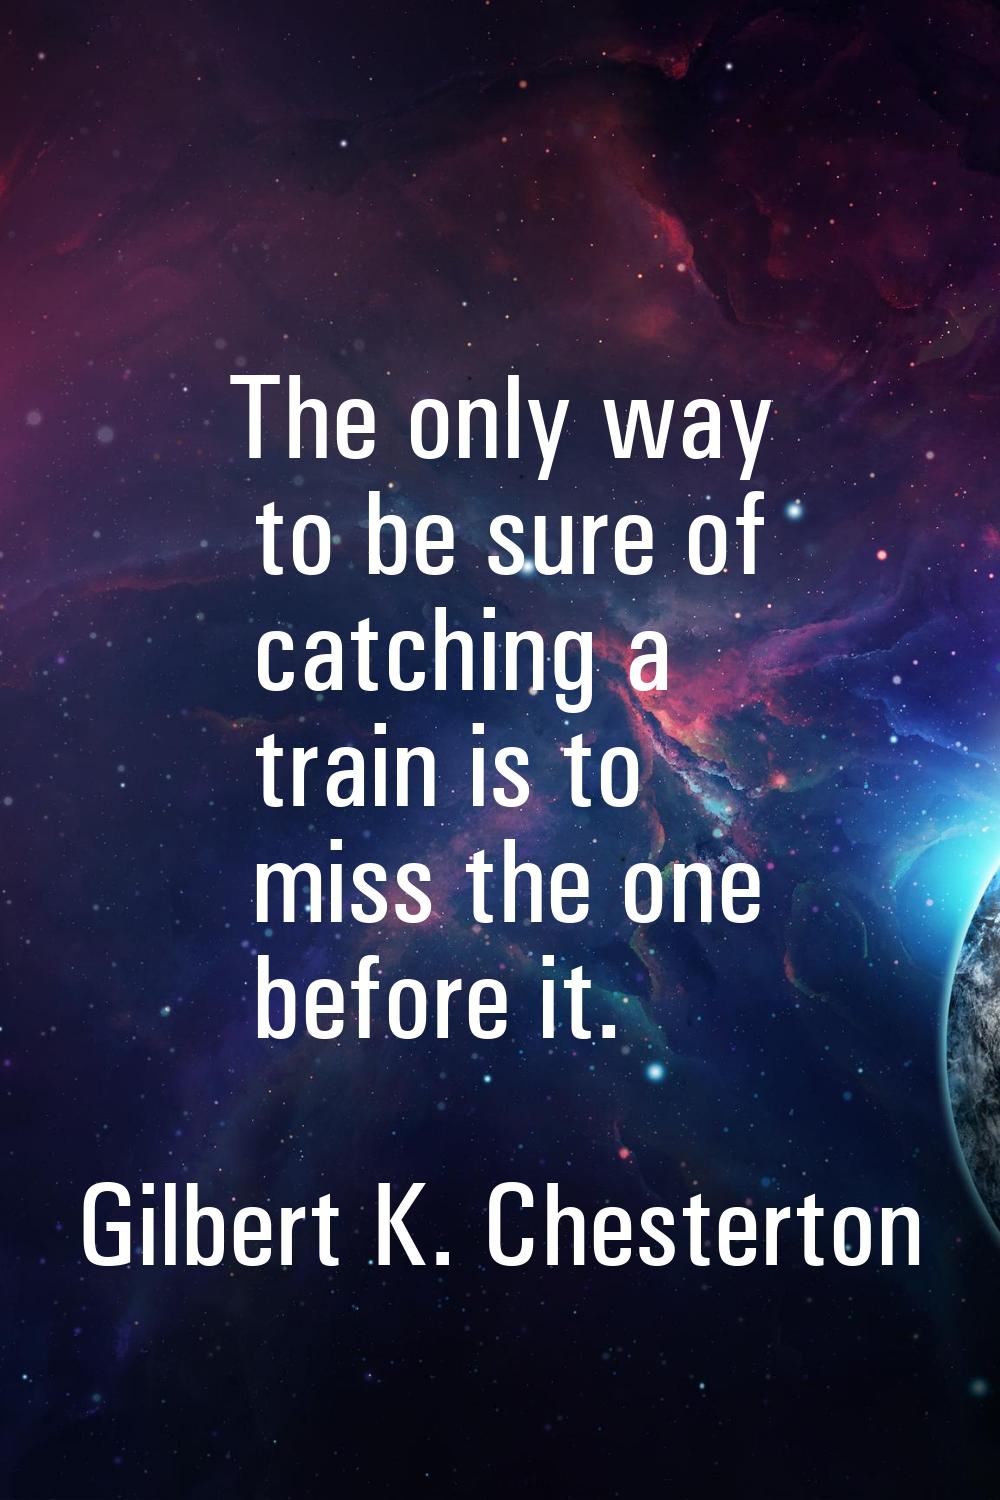 The only way to be sure of catching a train is to miss the one before it.